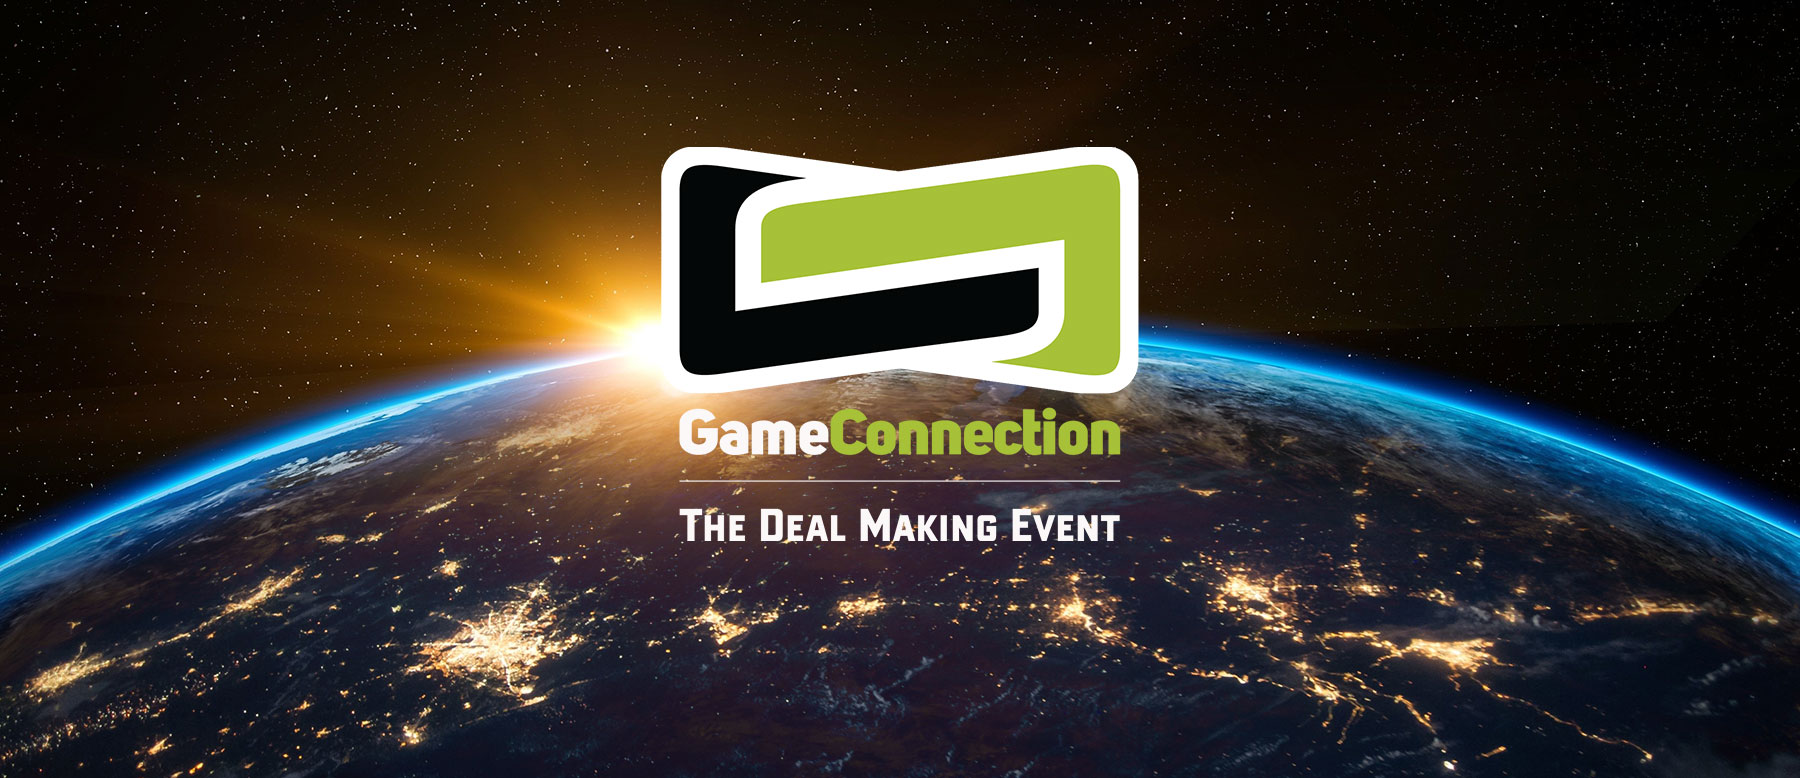 Connection Events - Game connection